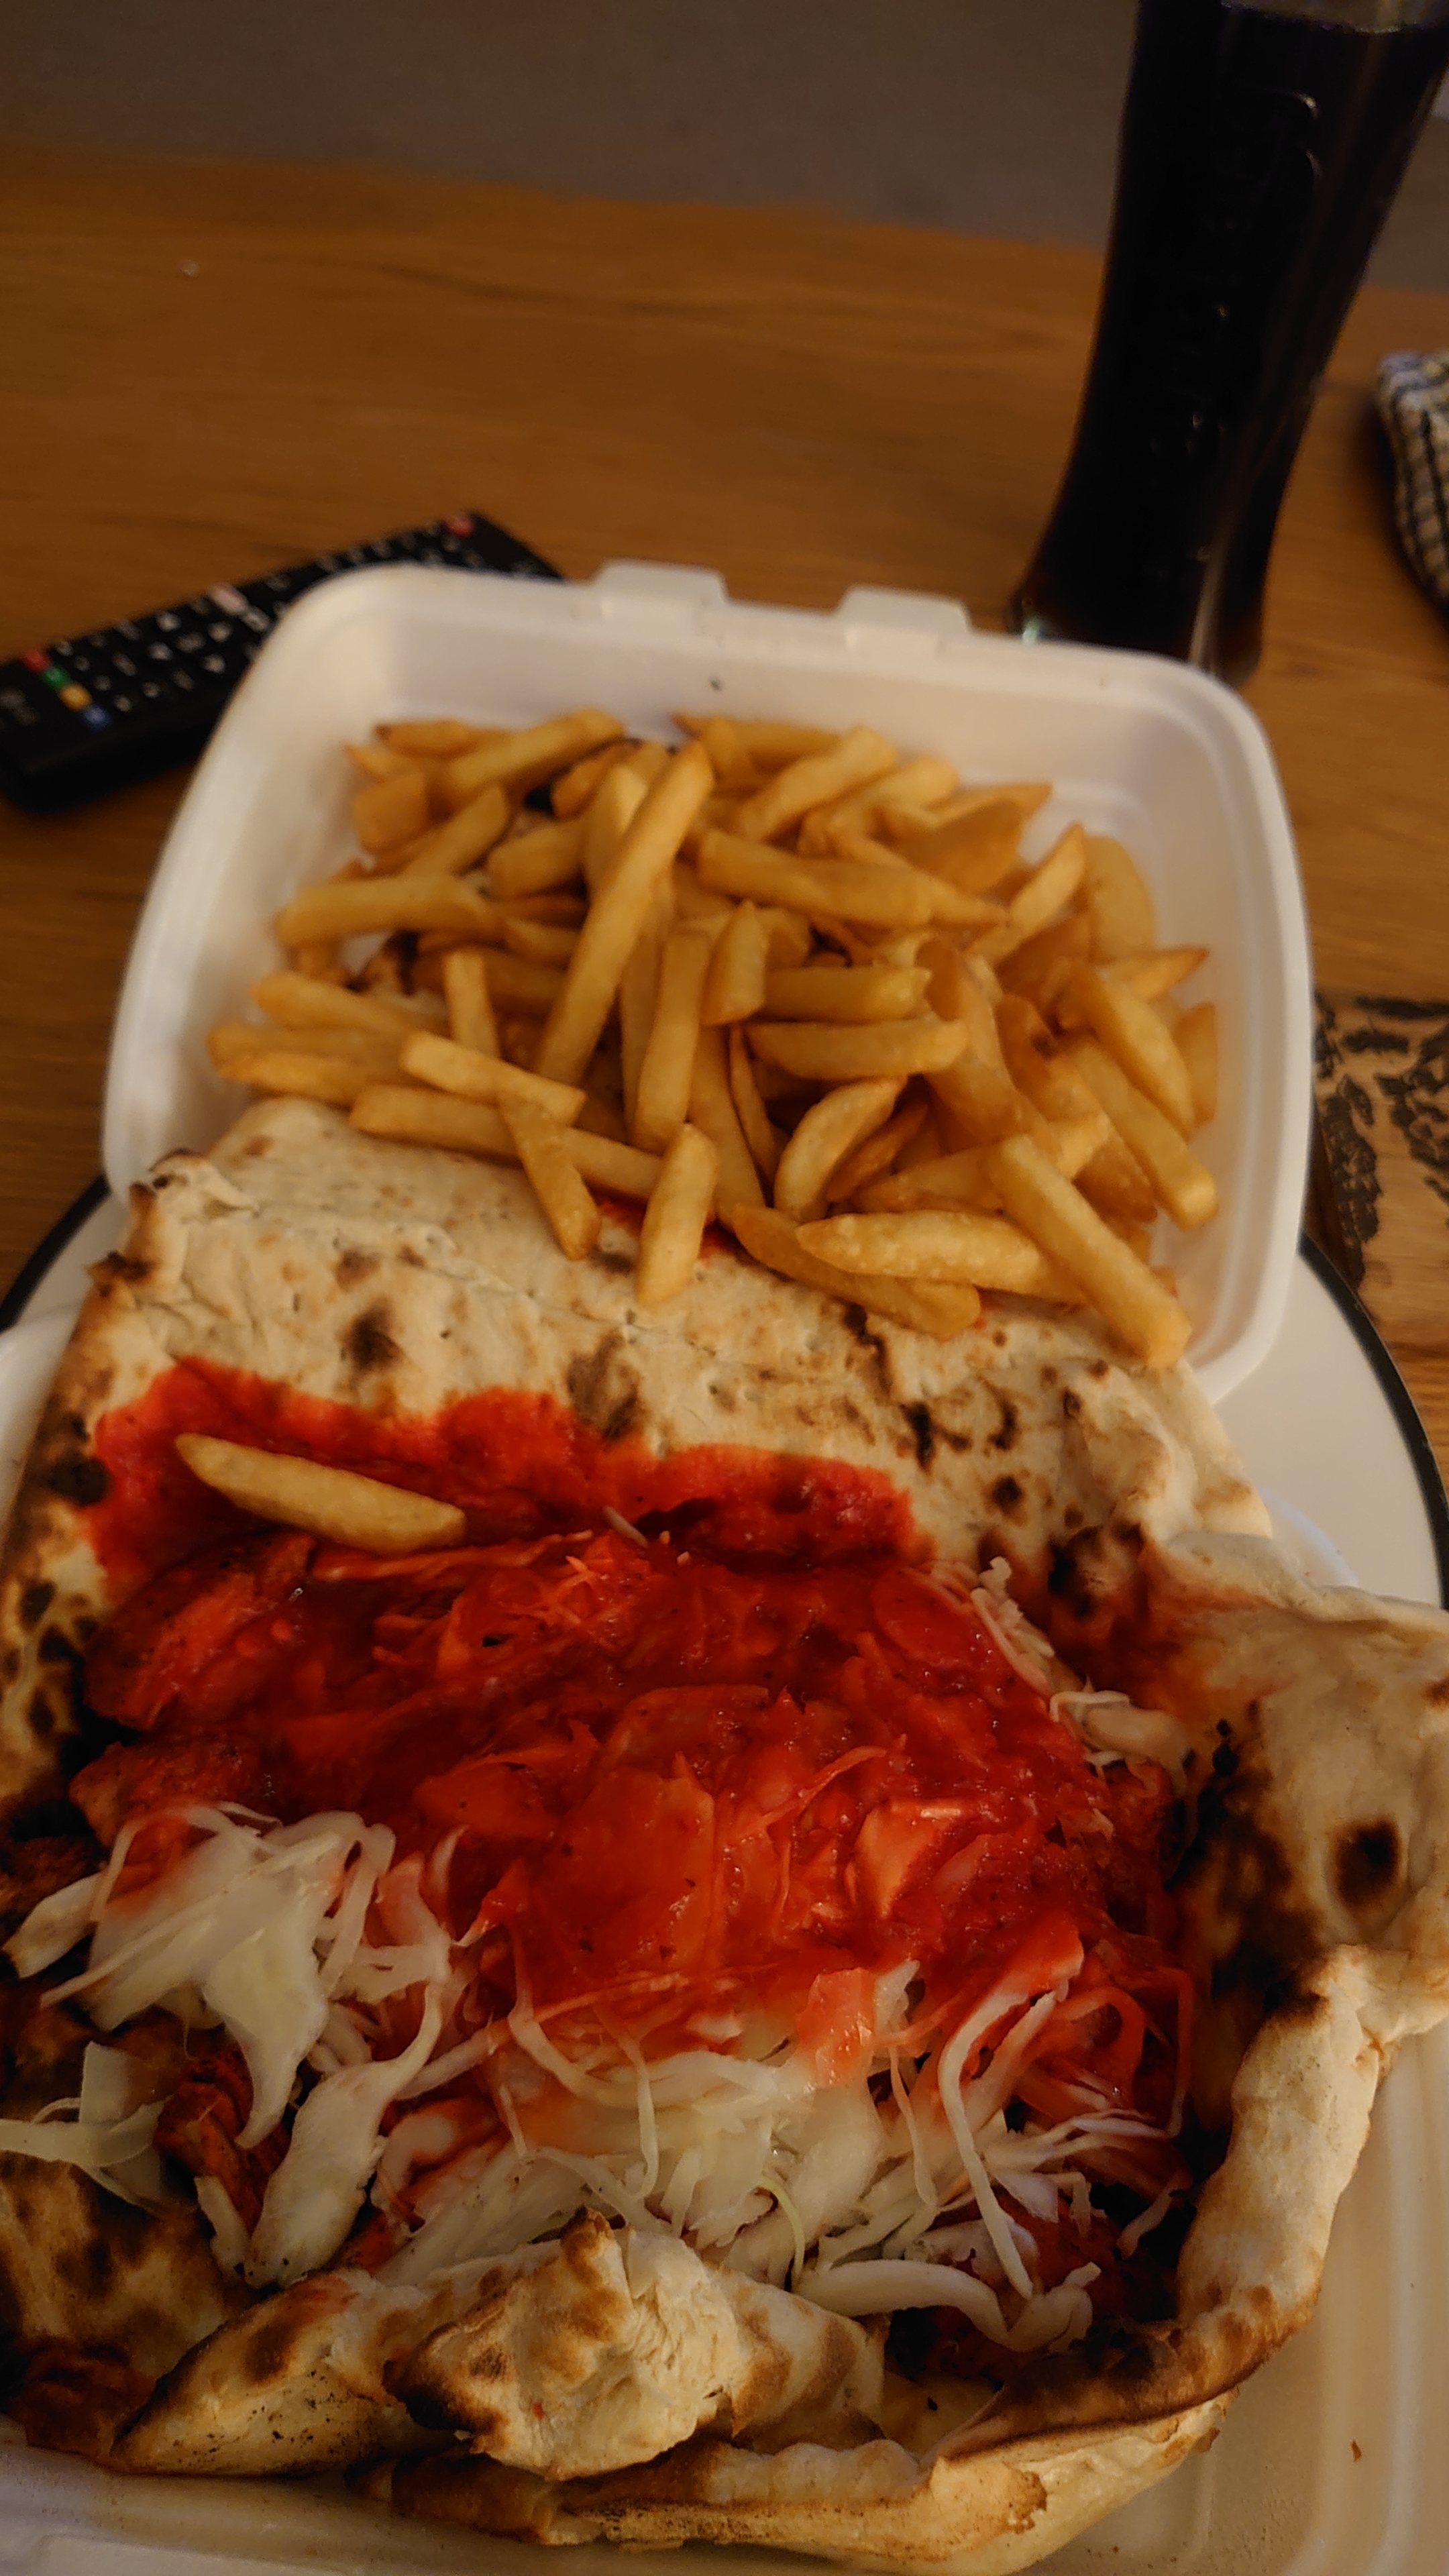 Dirty Takeaway Pictures Volume 3 - Page 462 - Food, Drink & Restaurants - PistonHeads